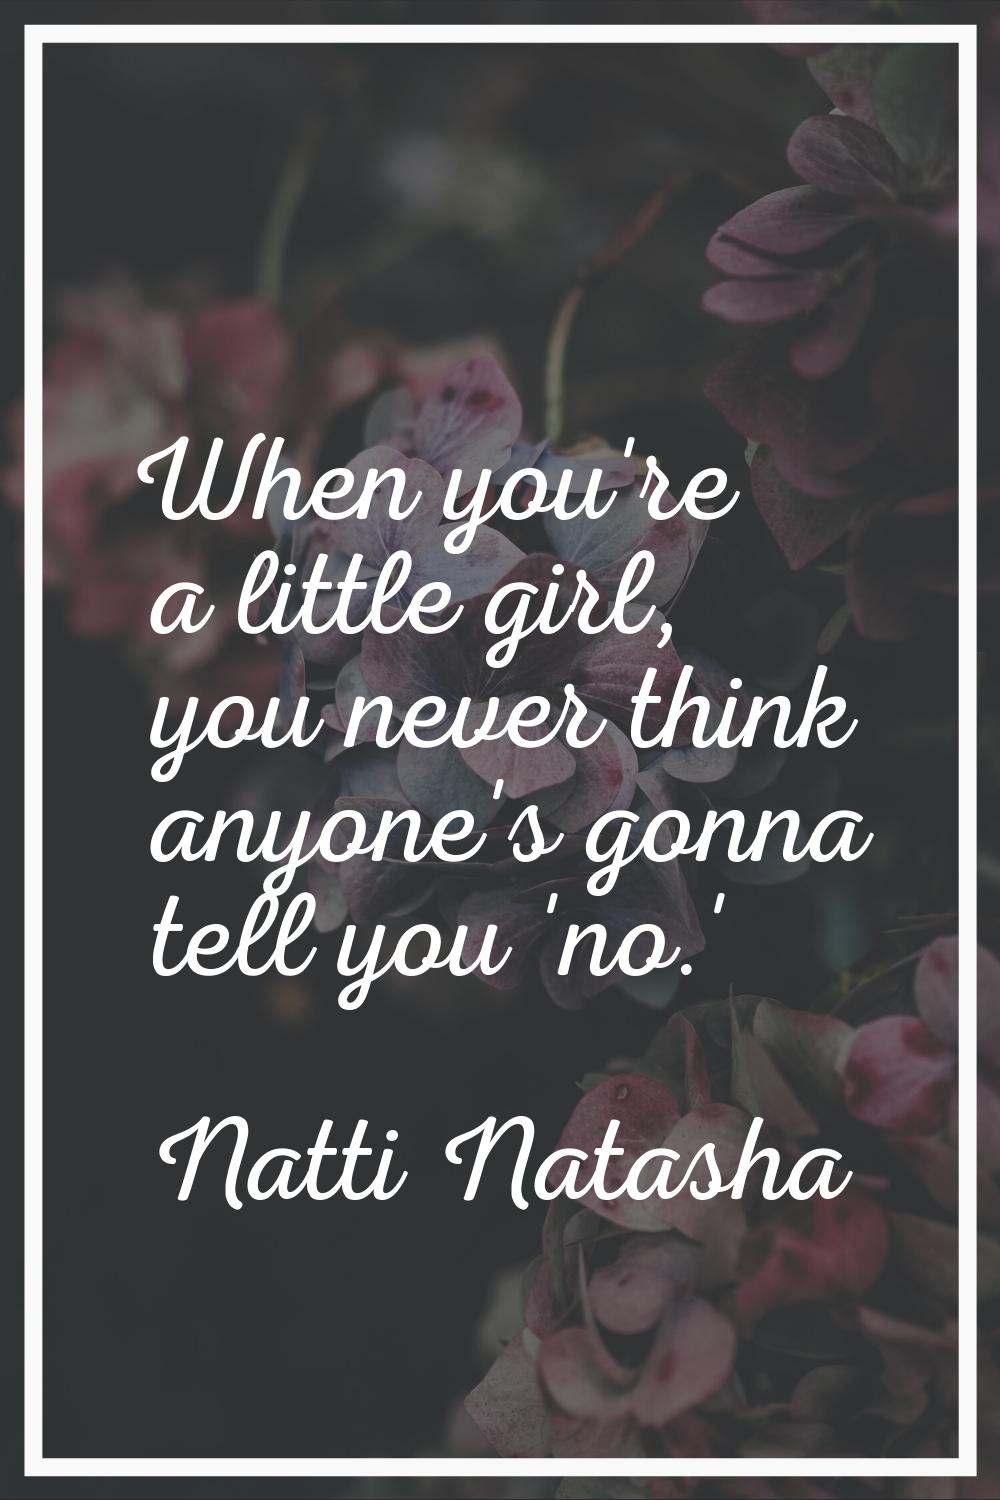 When you're a little girl, you never think anyone's gonna tell you 'no.'